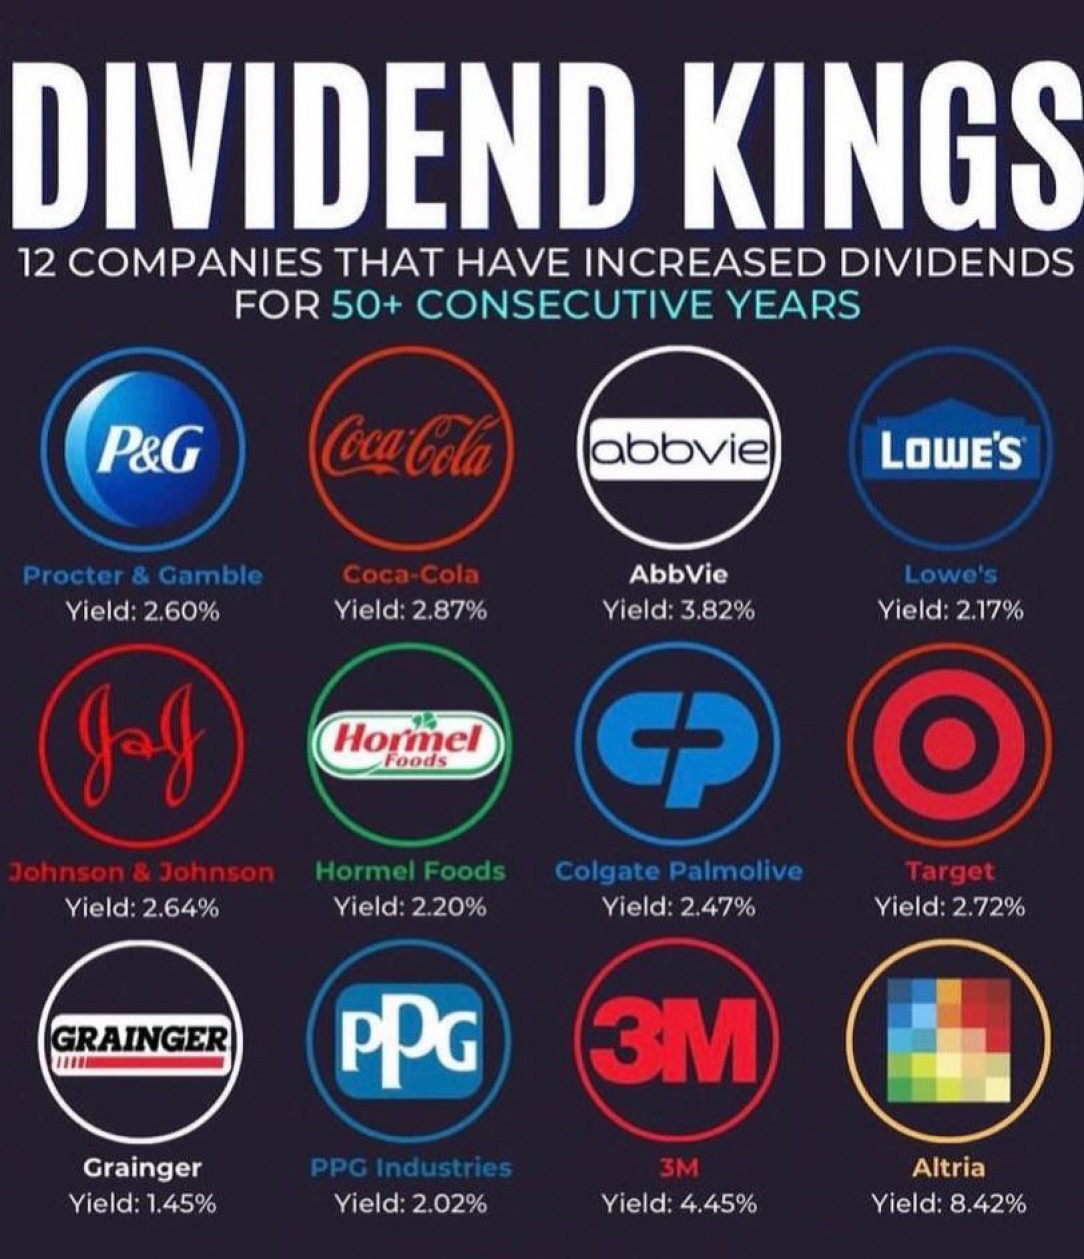 The Dividend Kings